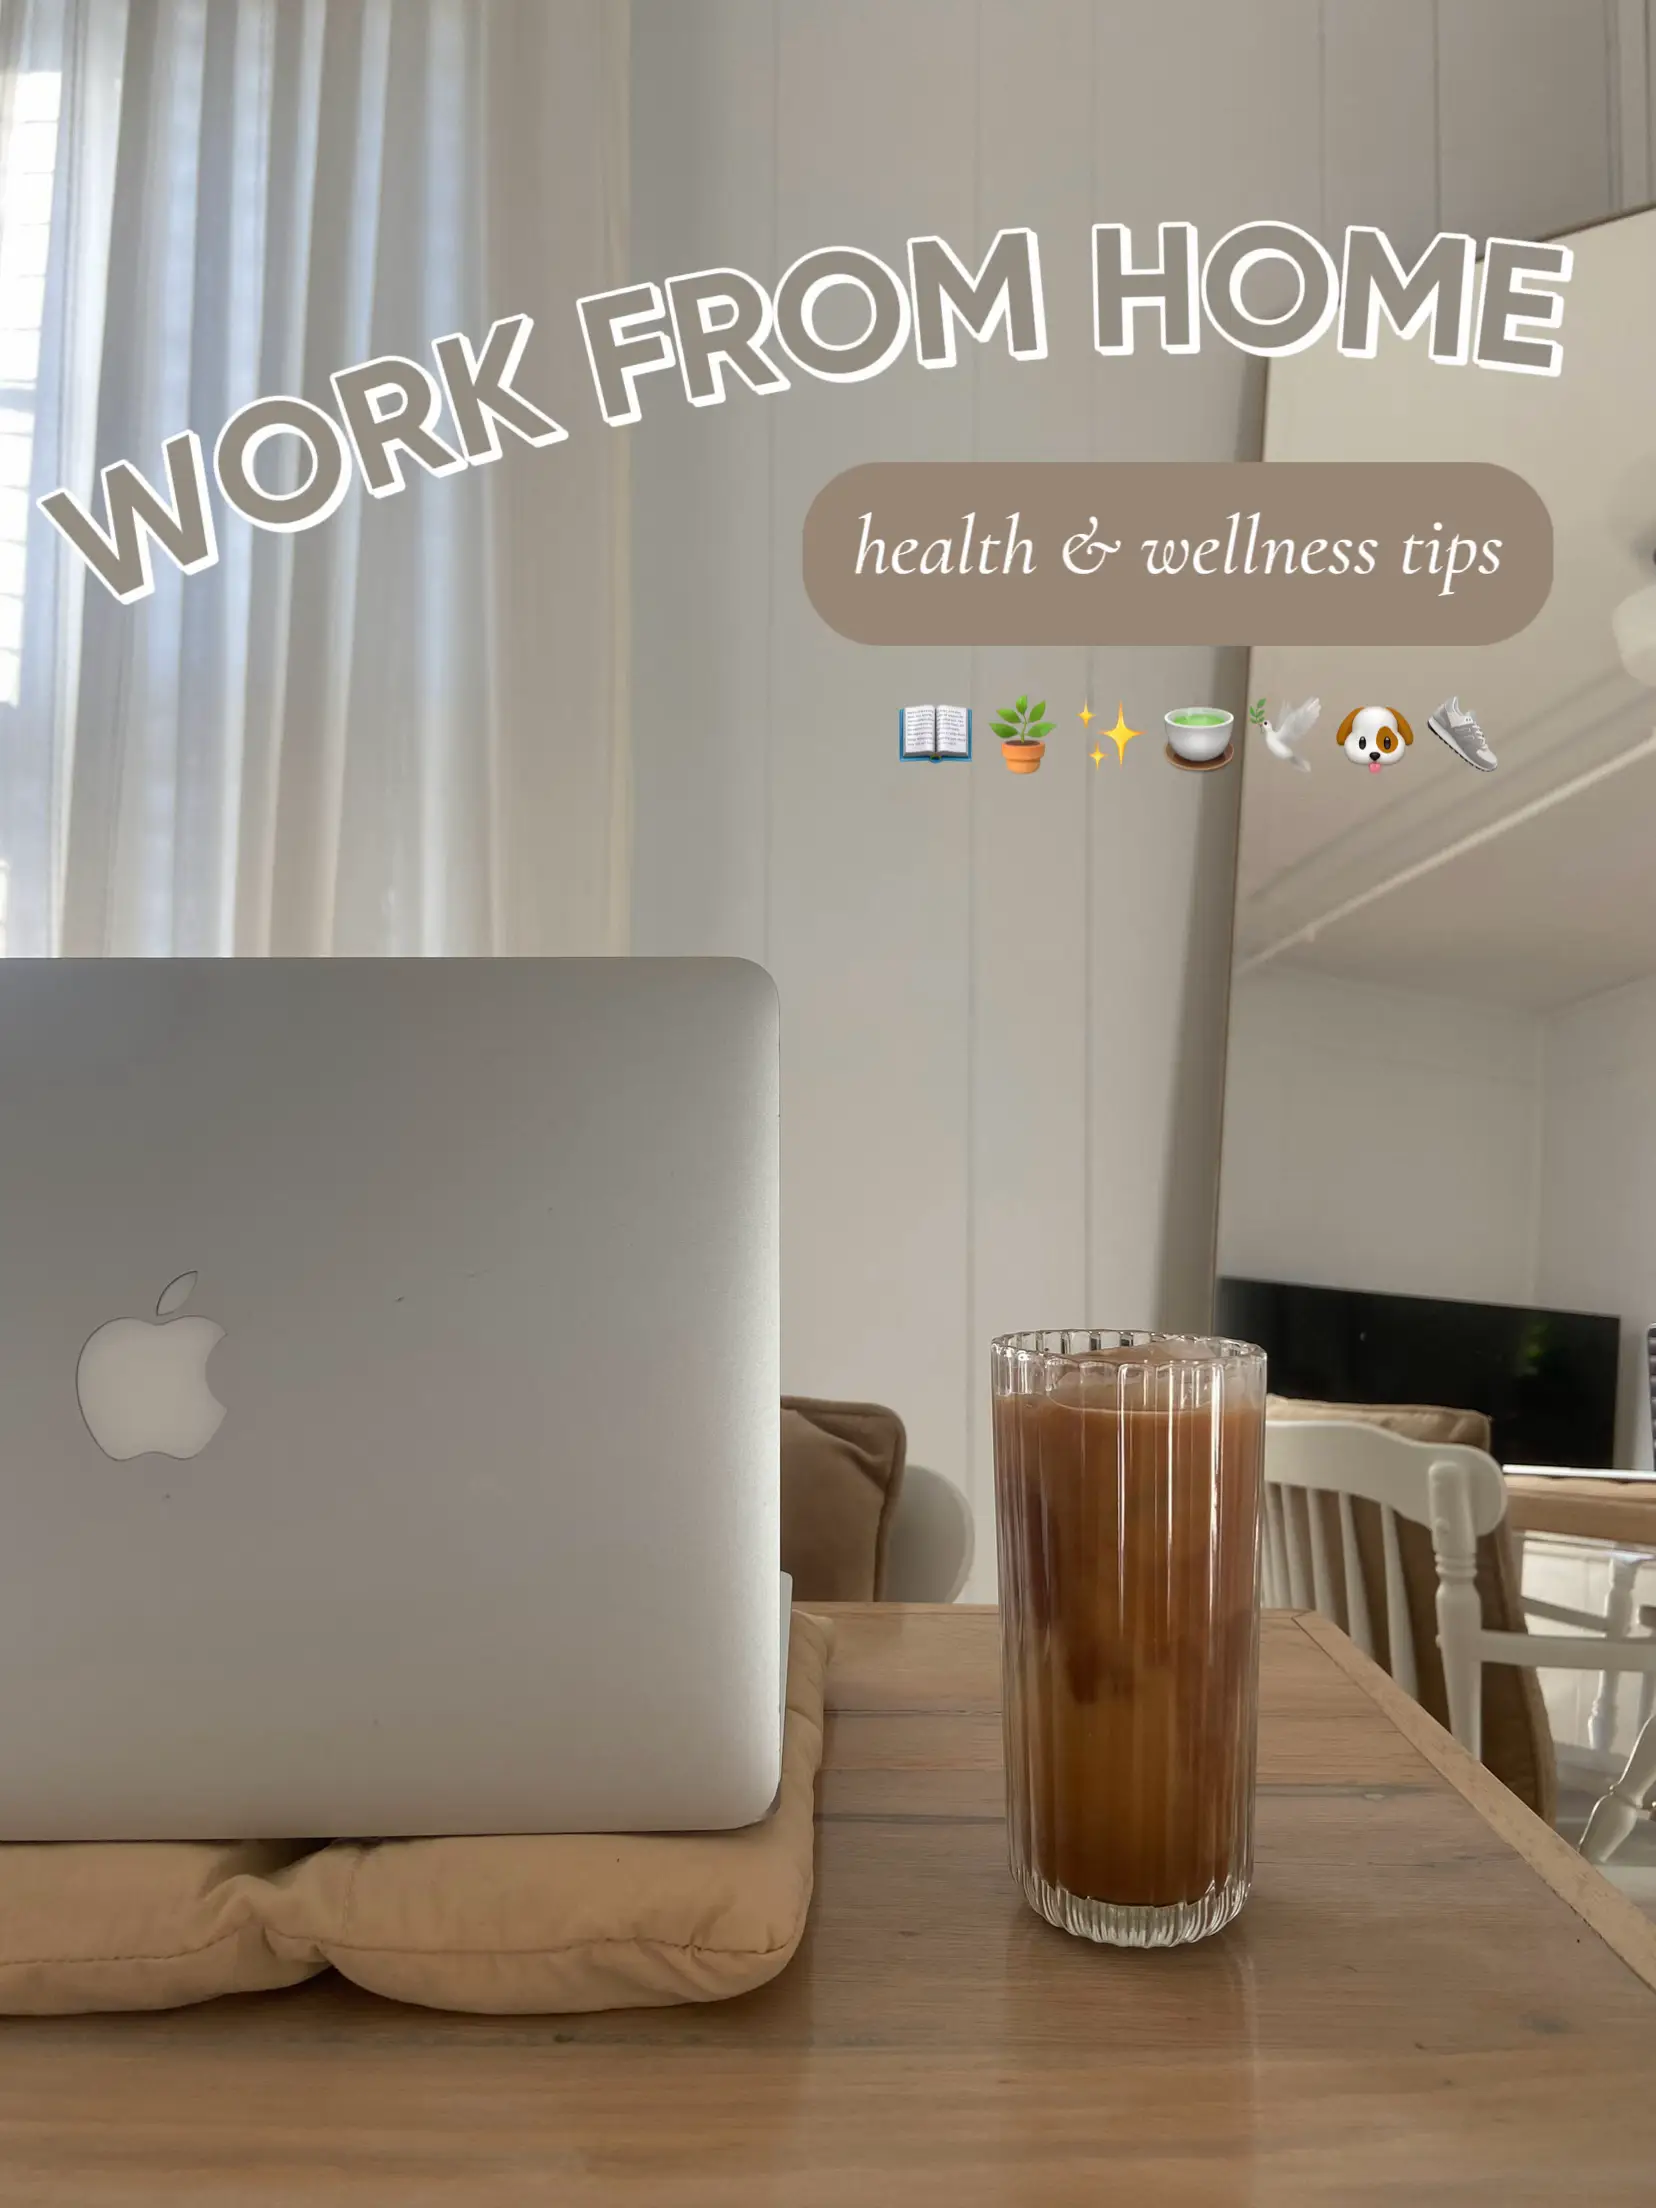  Work From Home Fitness